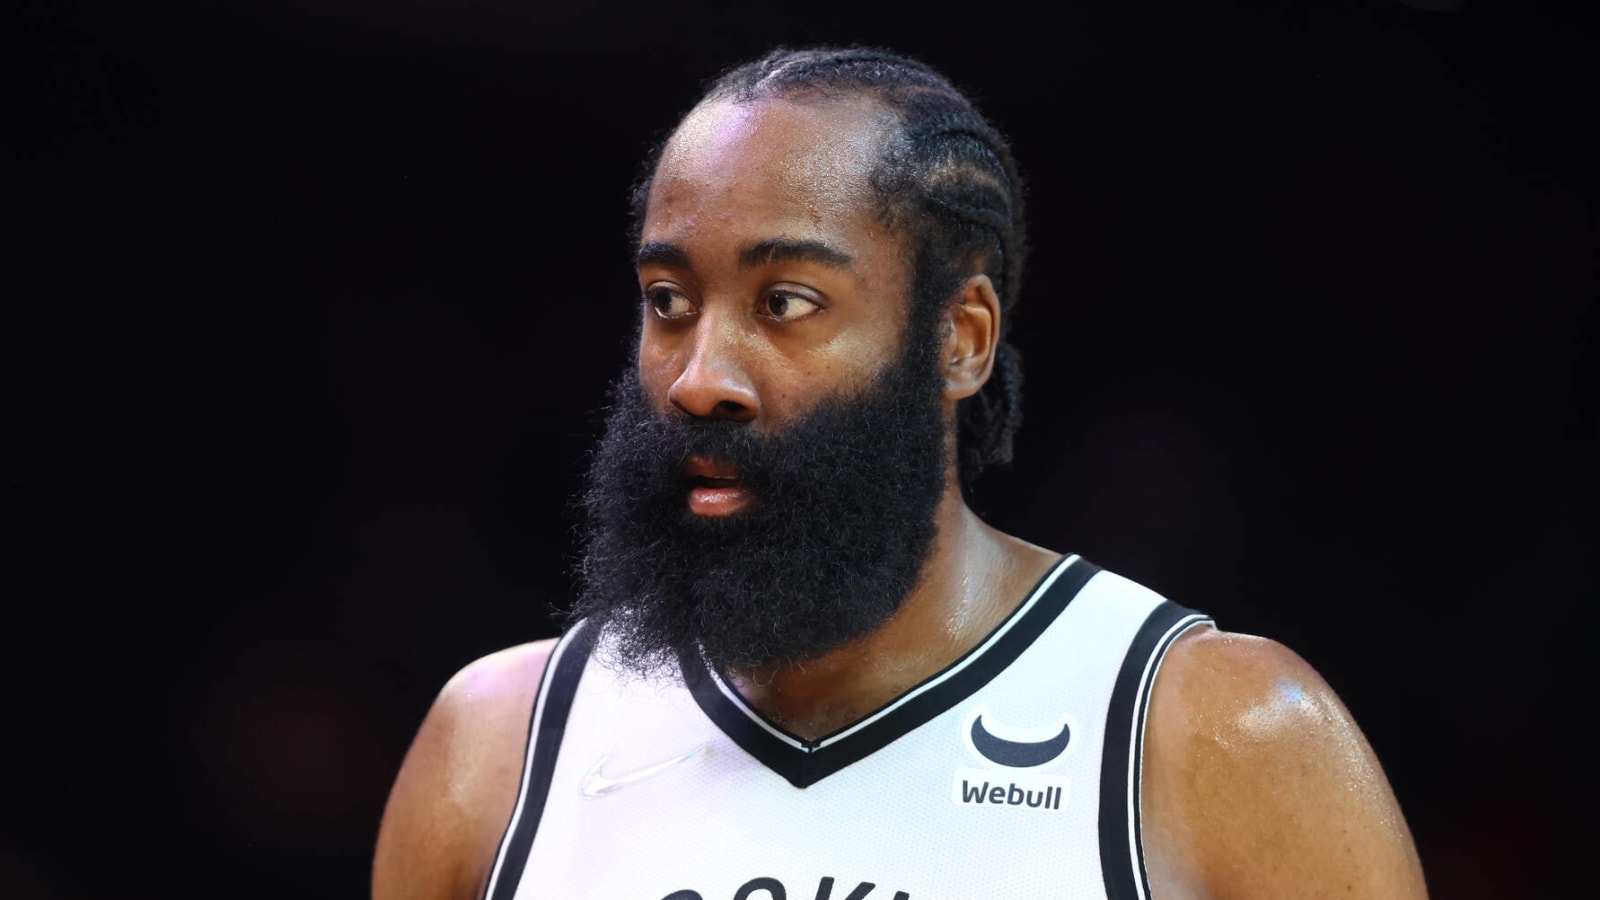 Harden picked last in All-Star Draft as KD refuses to pick him